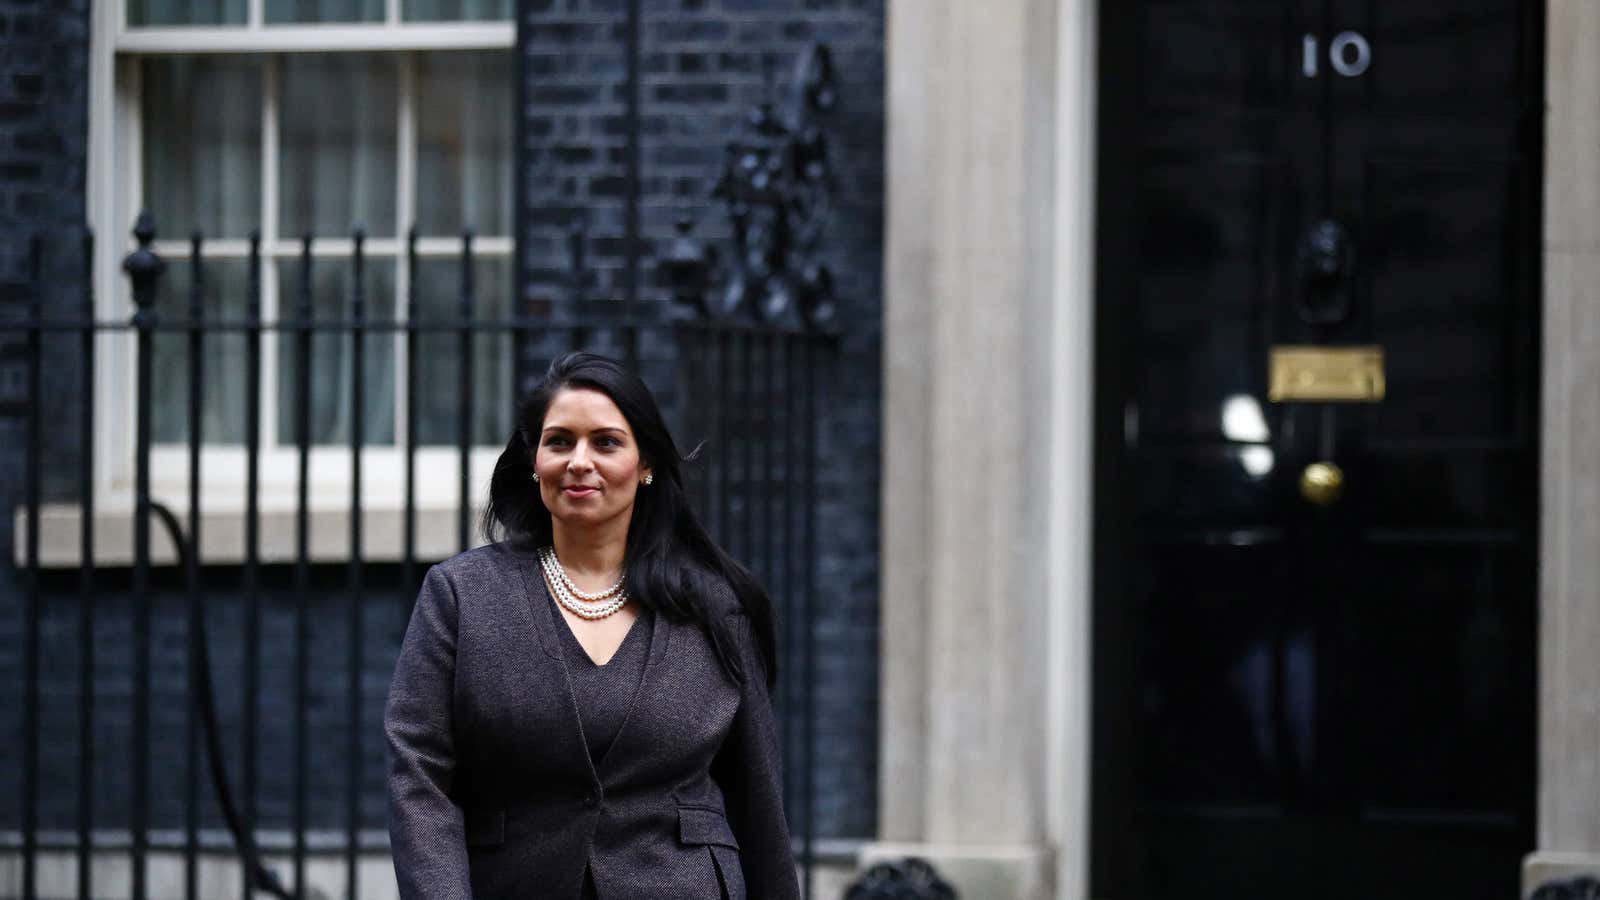 Home secretary Priti Patel said the new system would bring “the brightest and the best” to the UK.